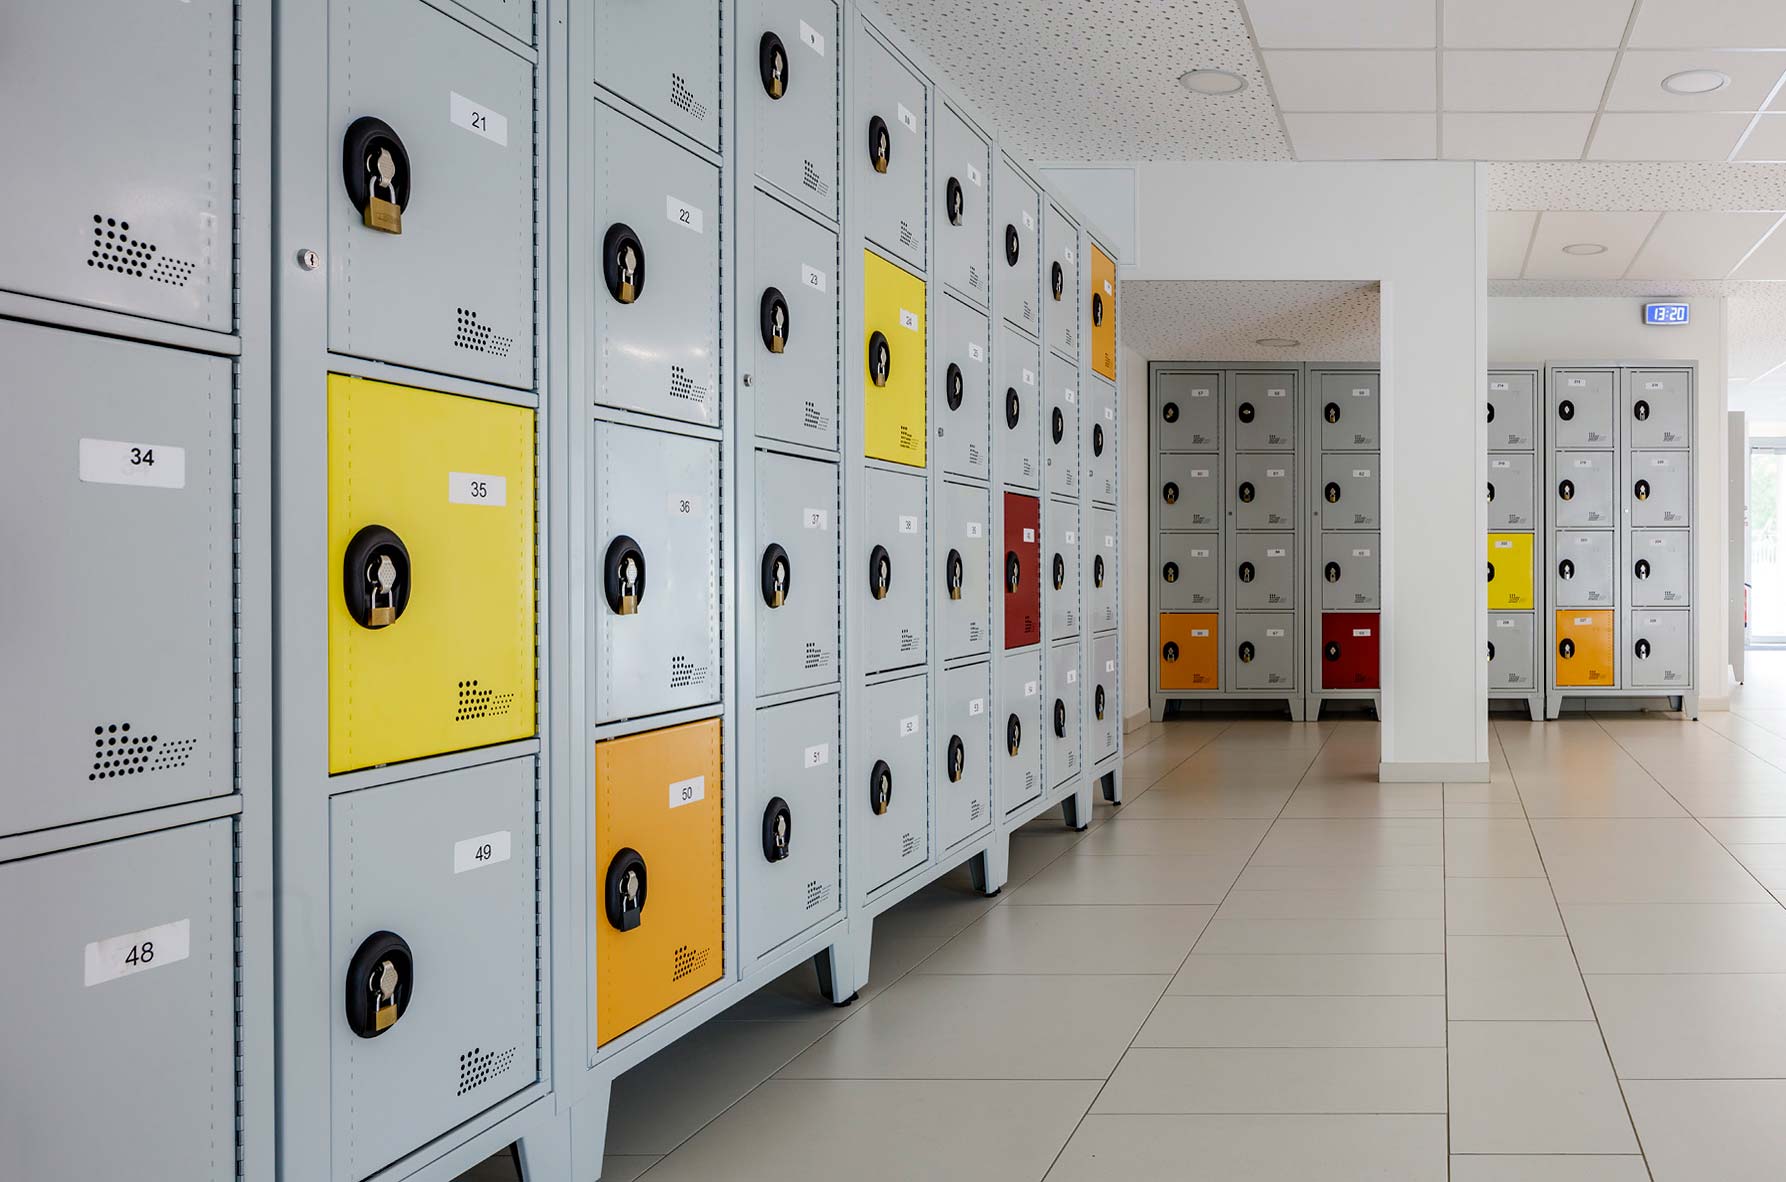 Inspectable student lockers